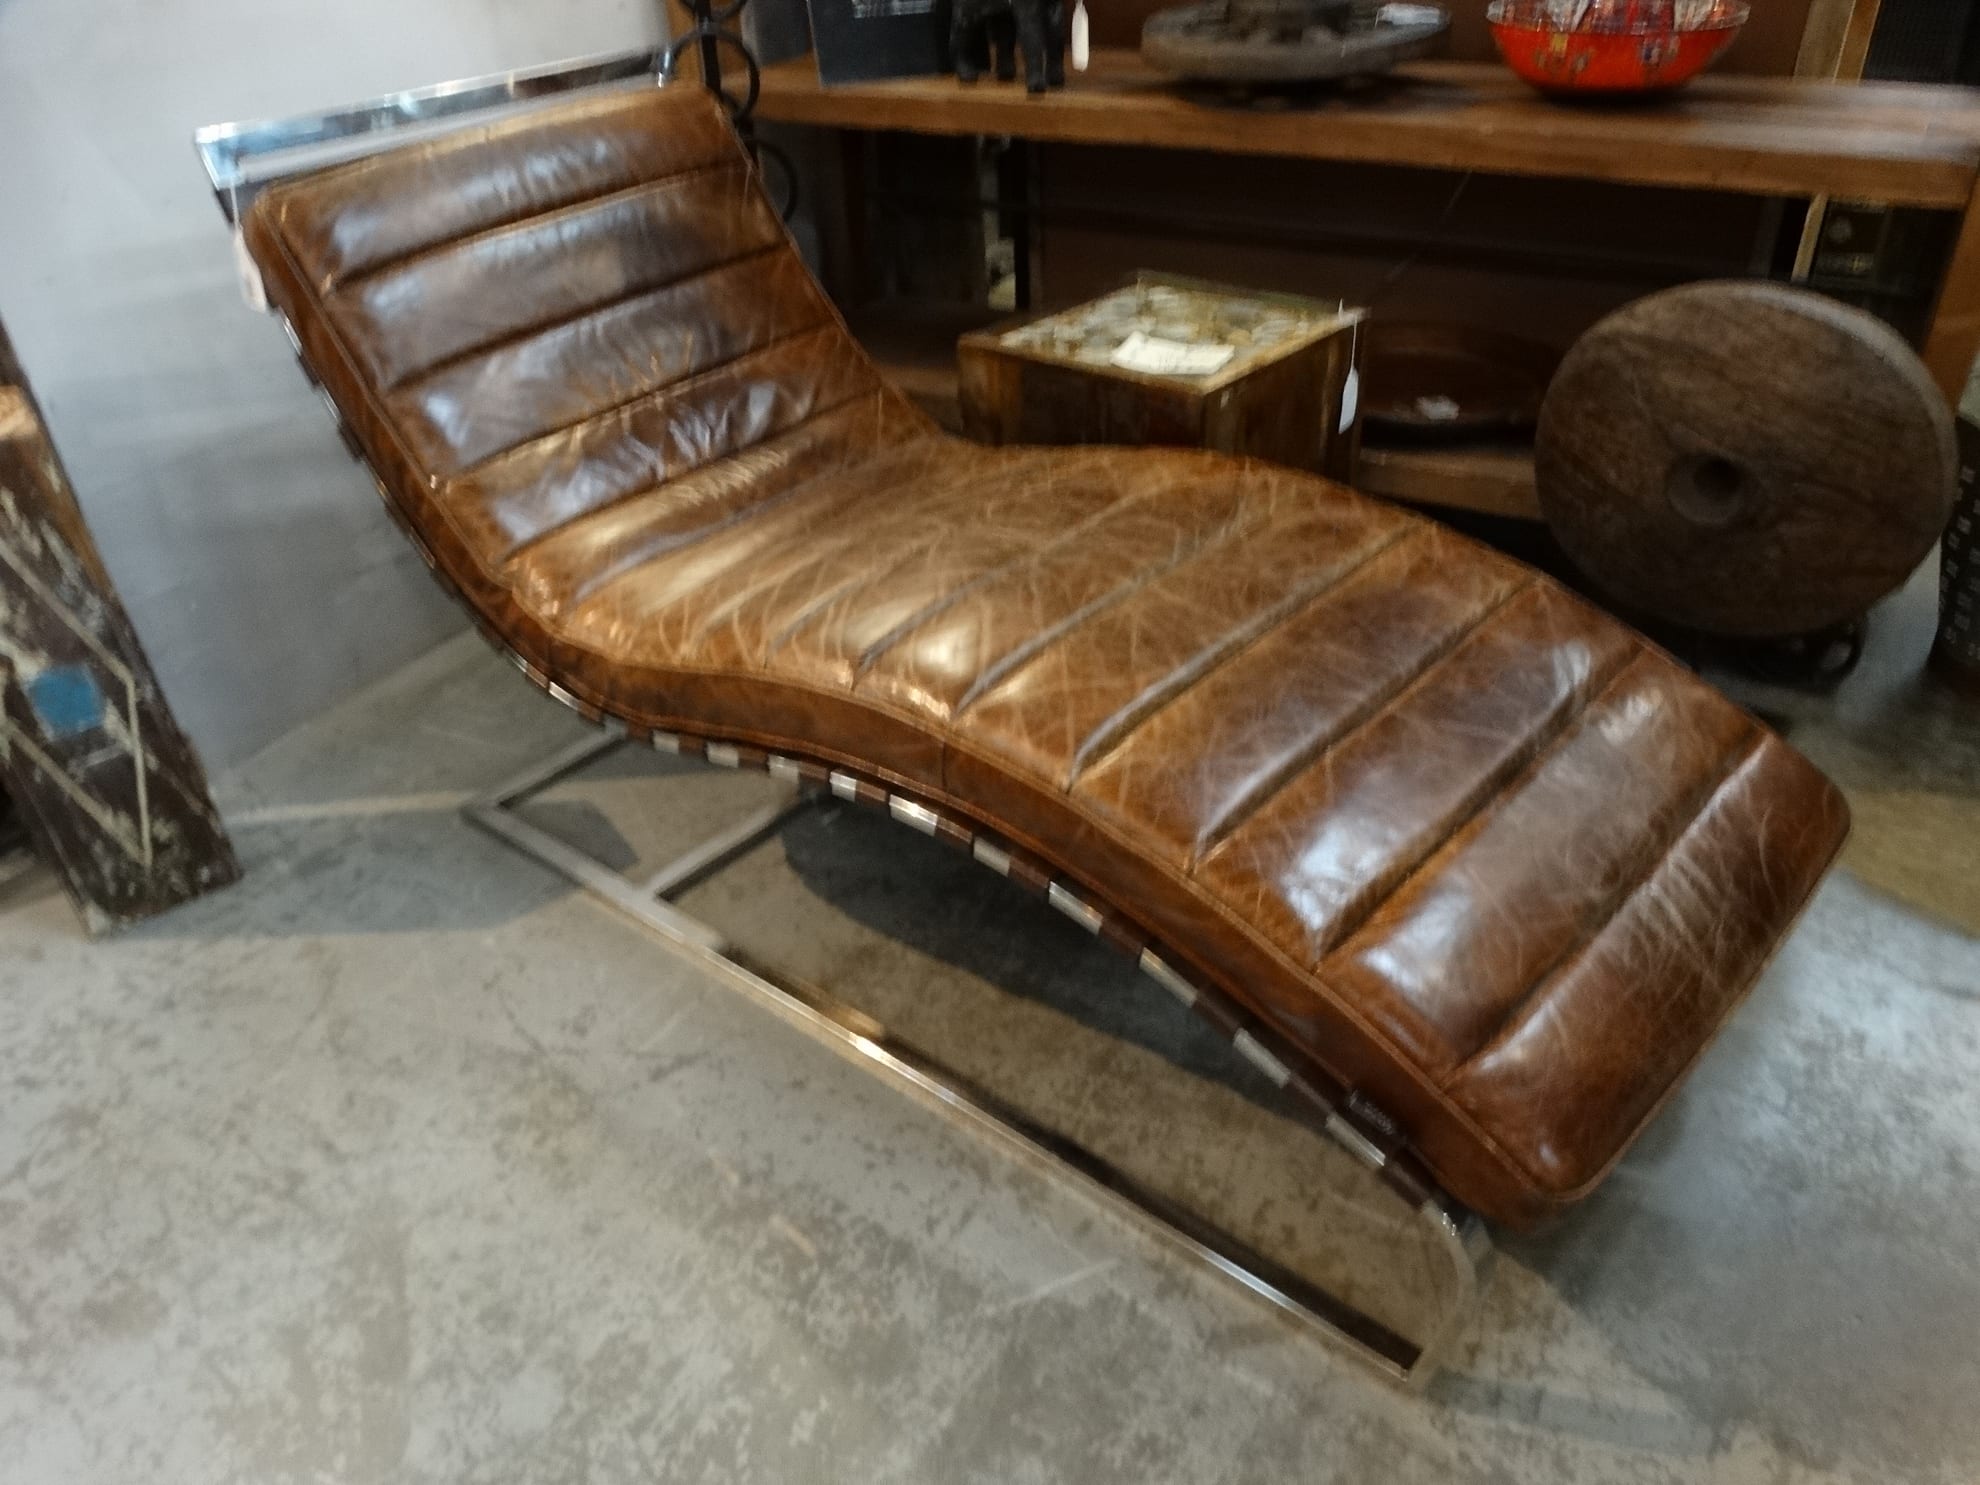 Elegant Brown Leather Chaise Is Compact, Brown Leather Chaise